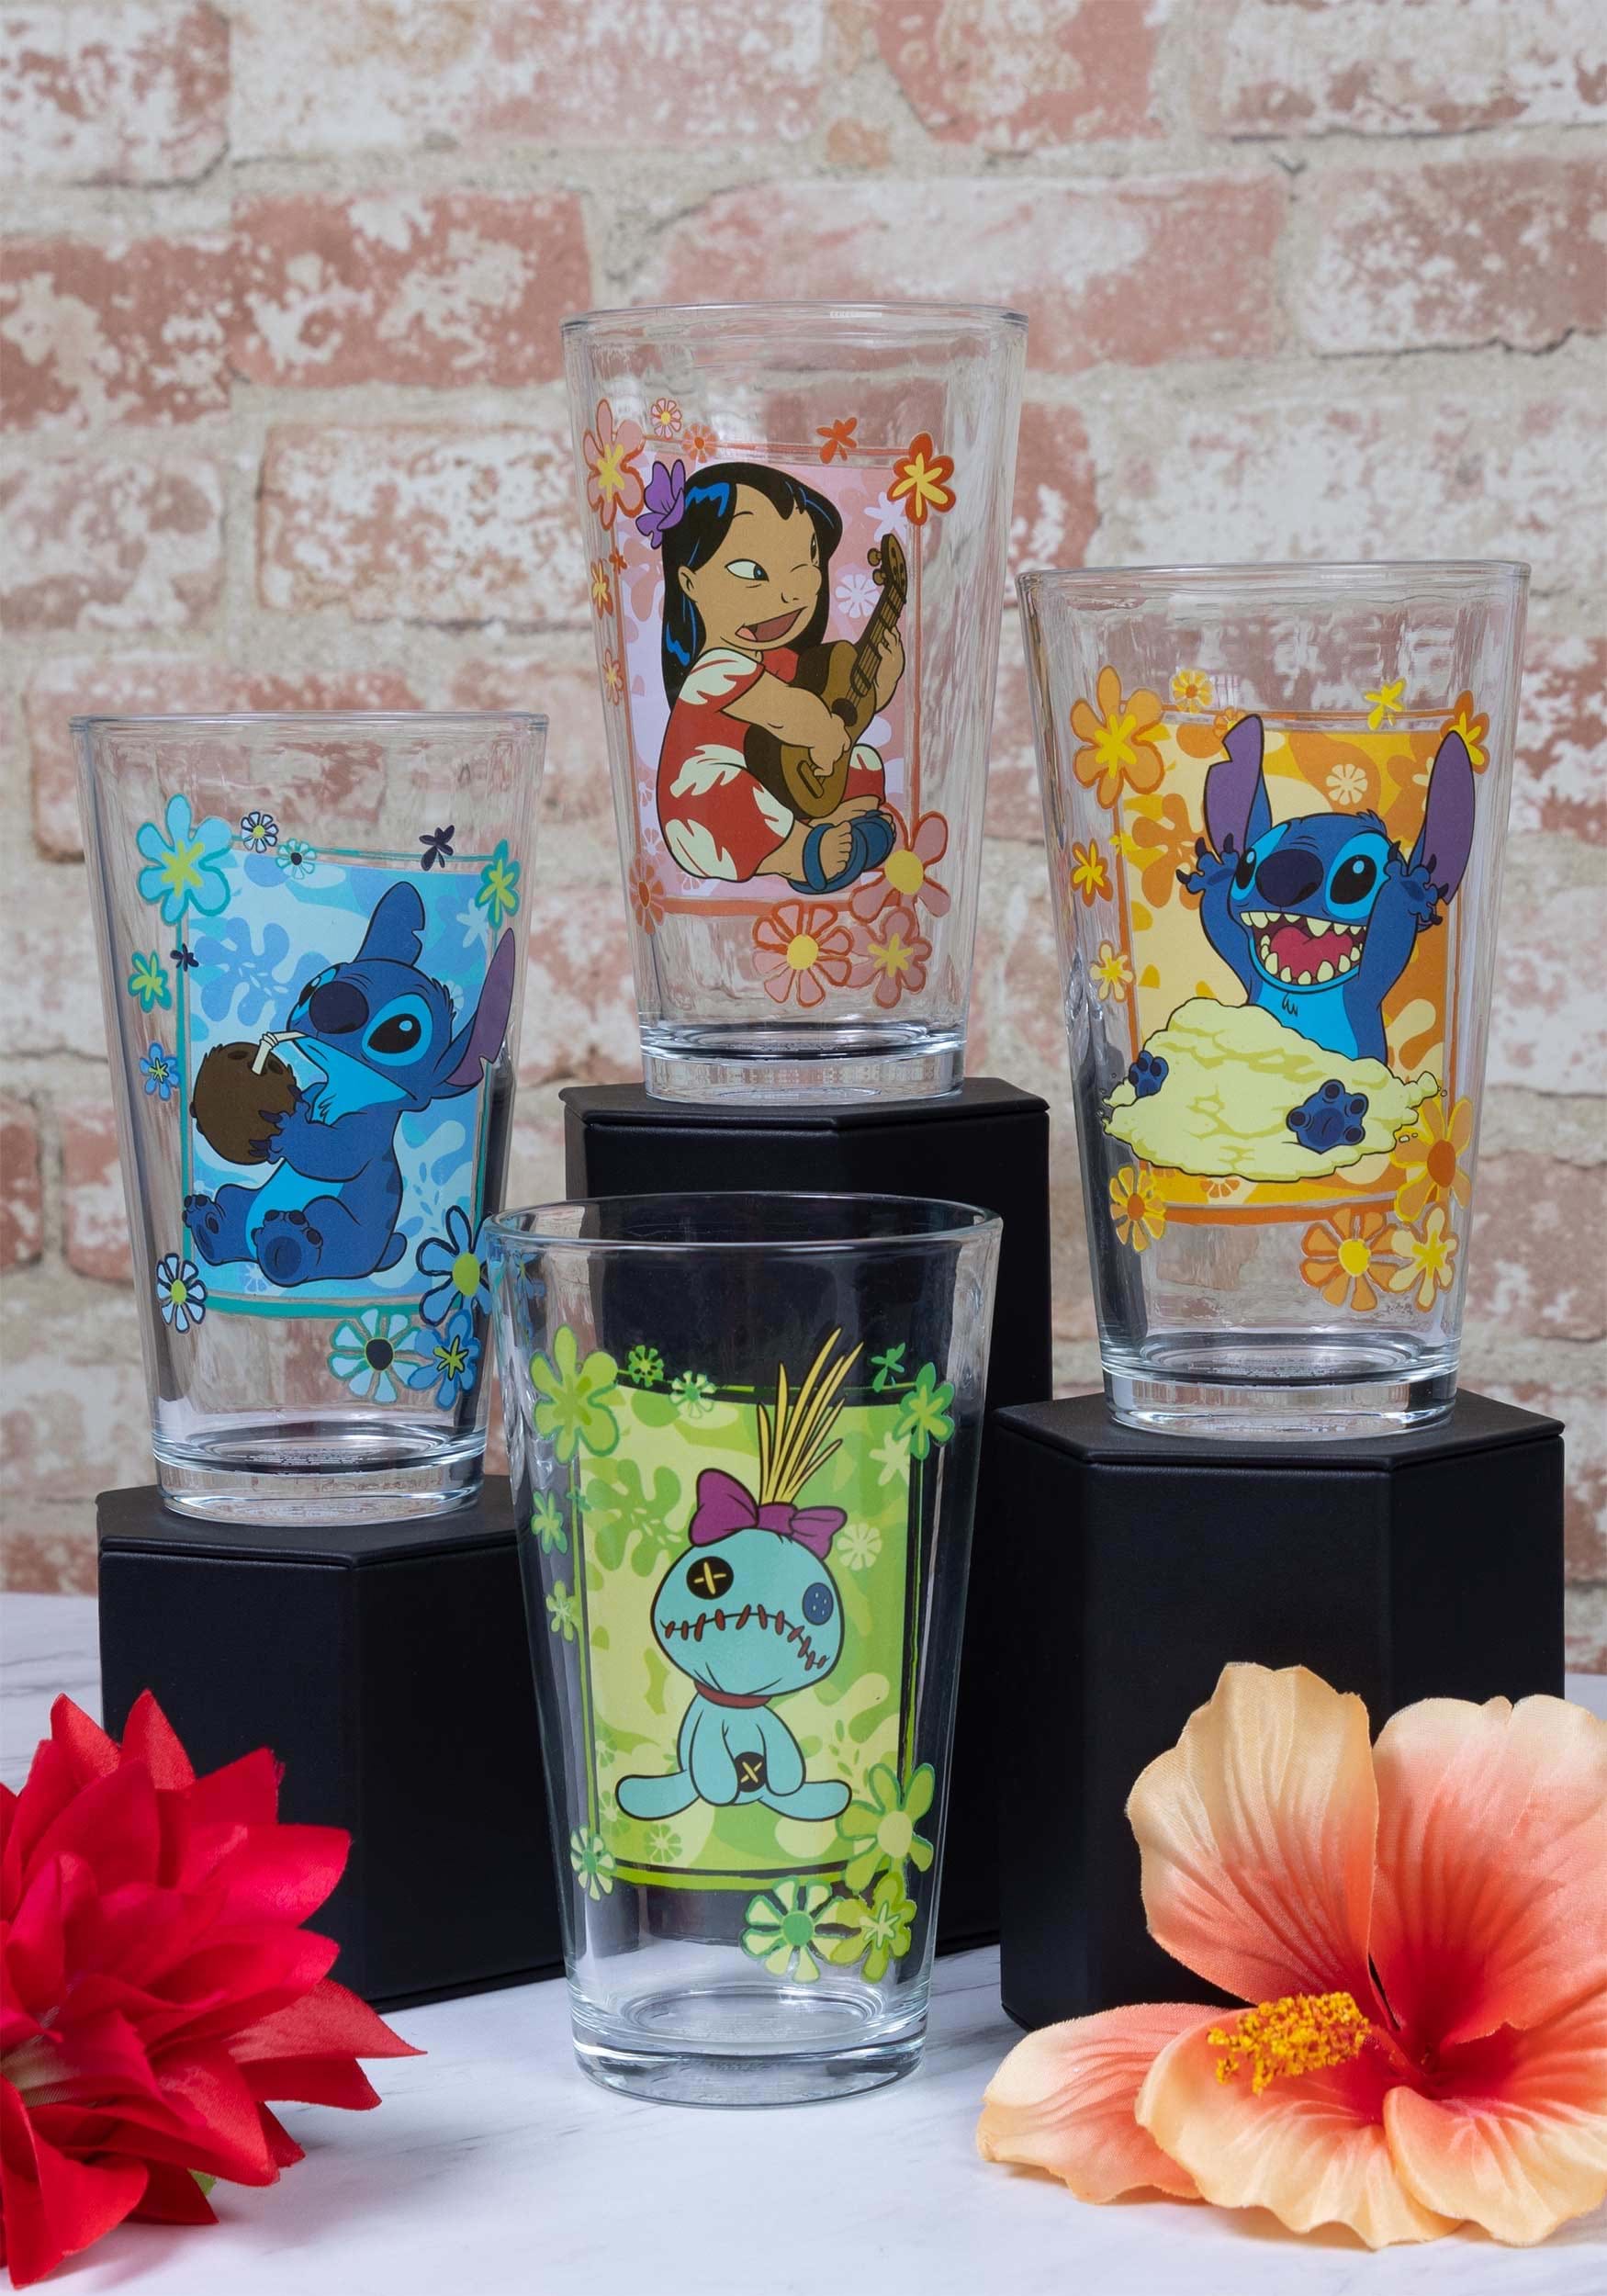 4 pc Oh My Disney No Color Disney Beauty and the Beast Drinking Glass Set